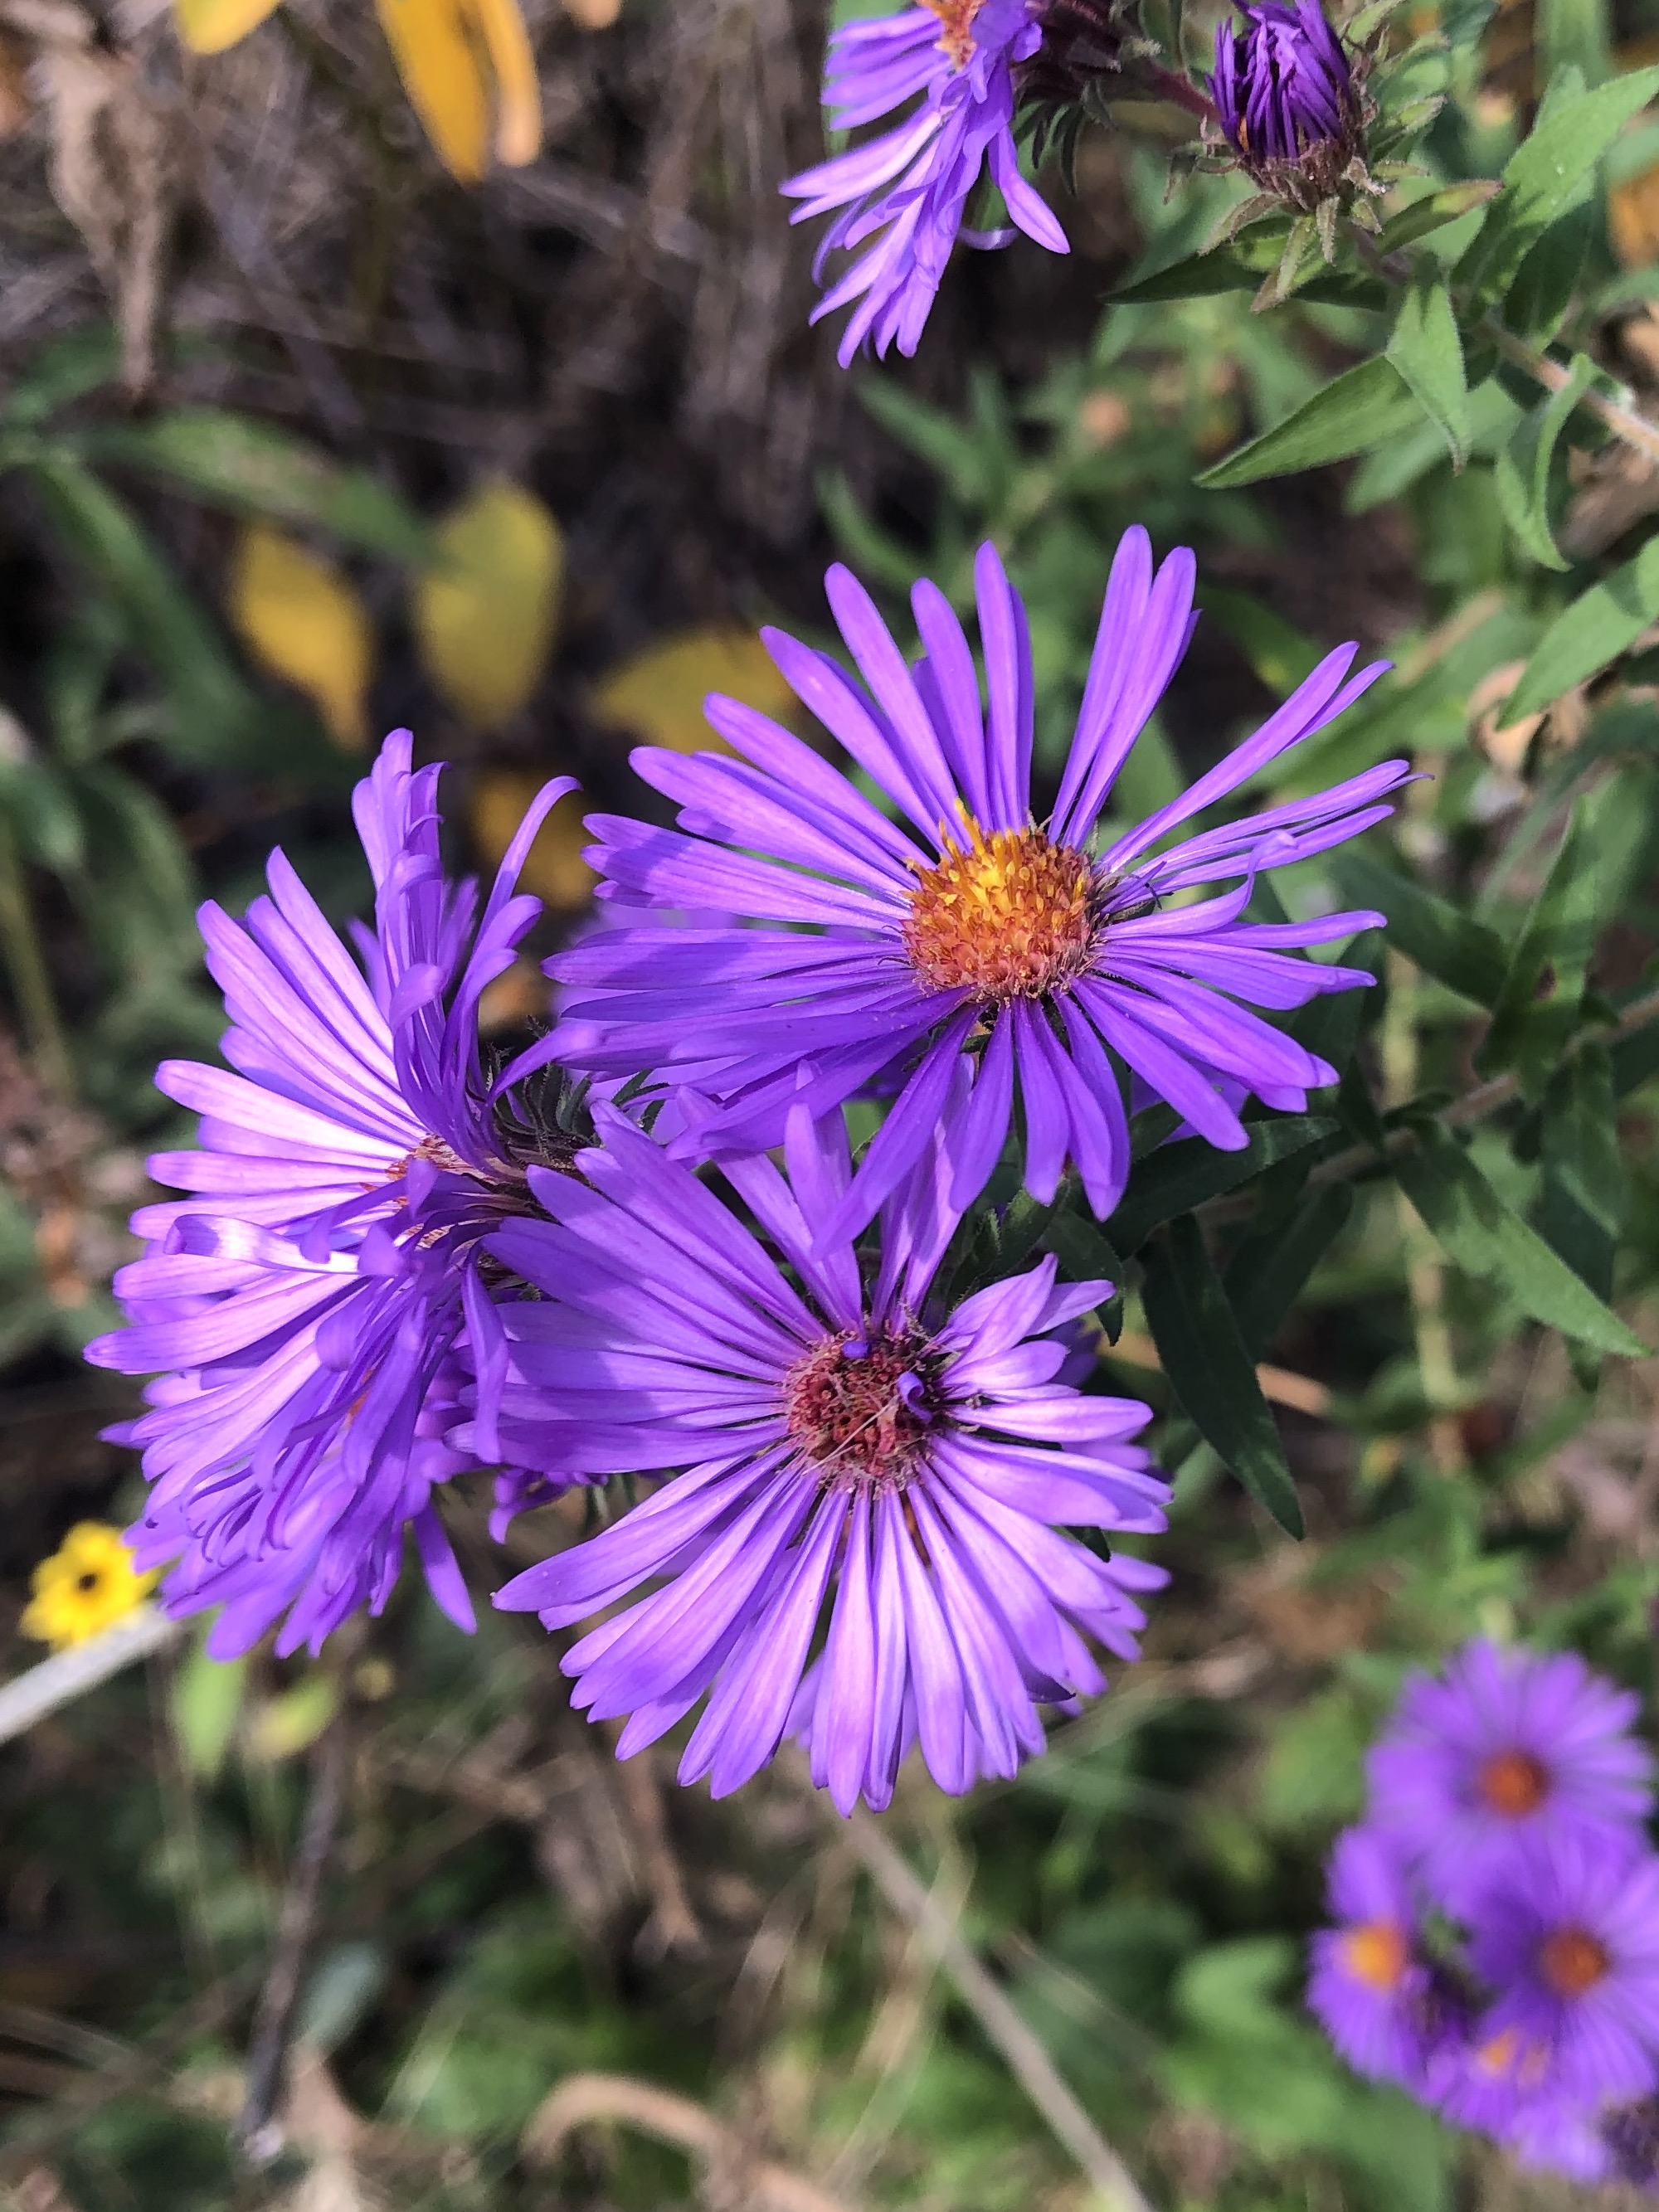 New England Aster on shore of Vilas Park Lagoon in Madison, Wisconsin on October 2, 2021.